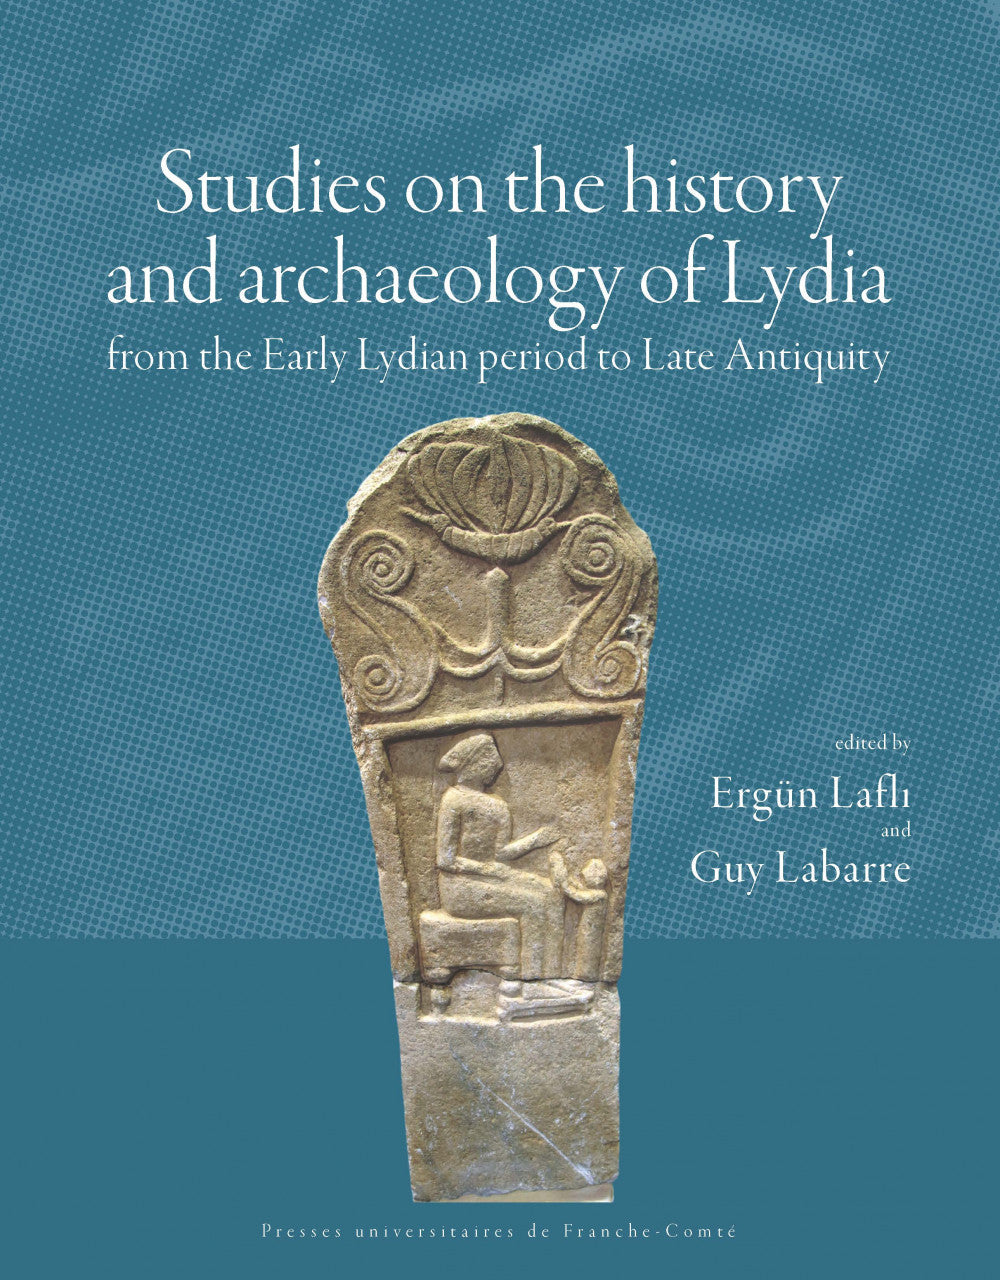 Studies on the history and archaeology of Lydia: From the Early Lydian period to Late Antiquity.